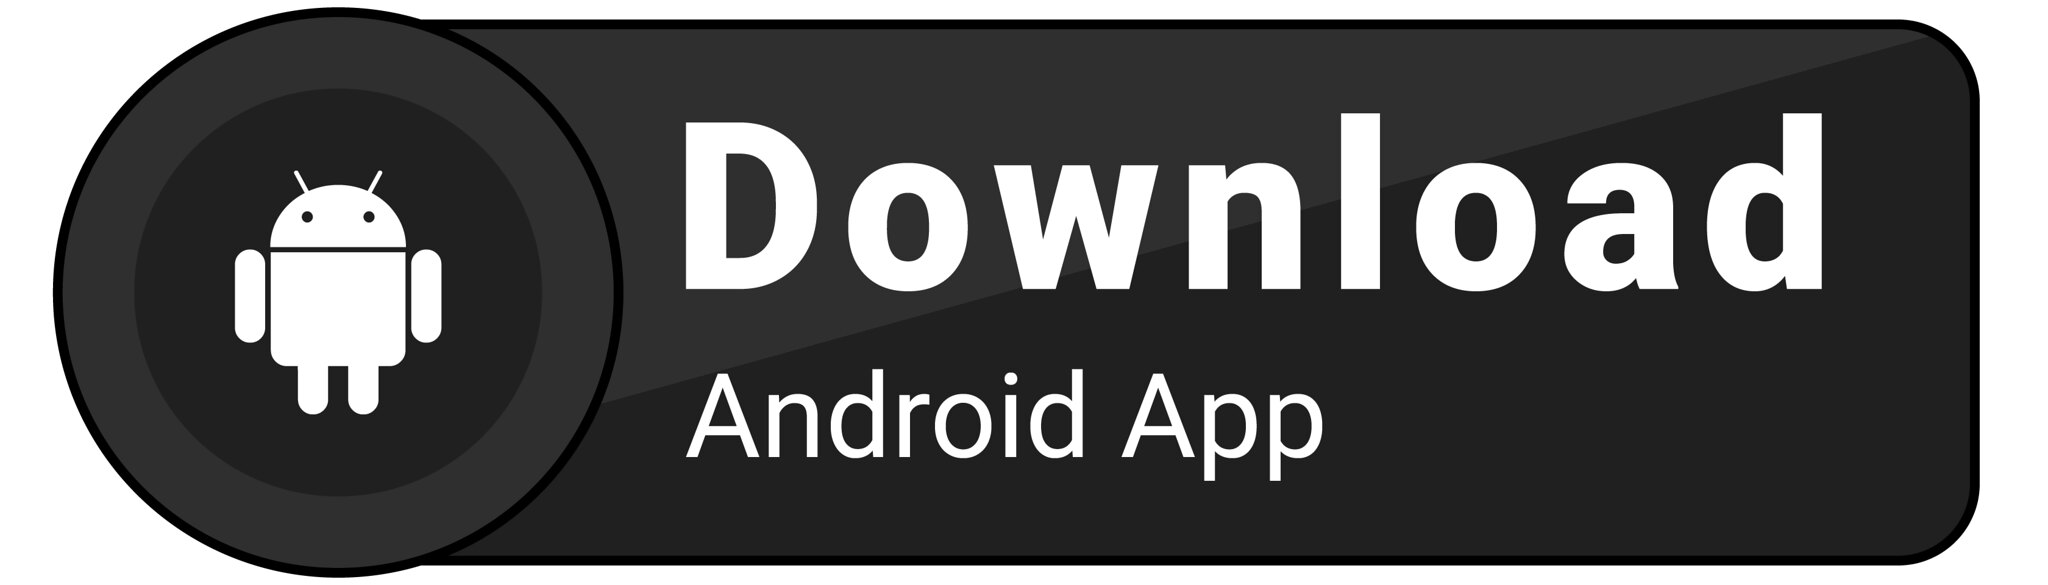 Video Downloader for Pinterest APK Download for Android Free